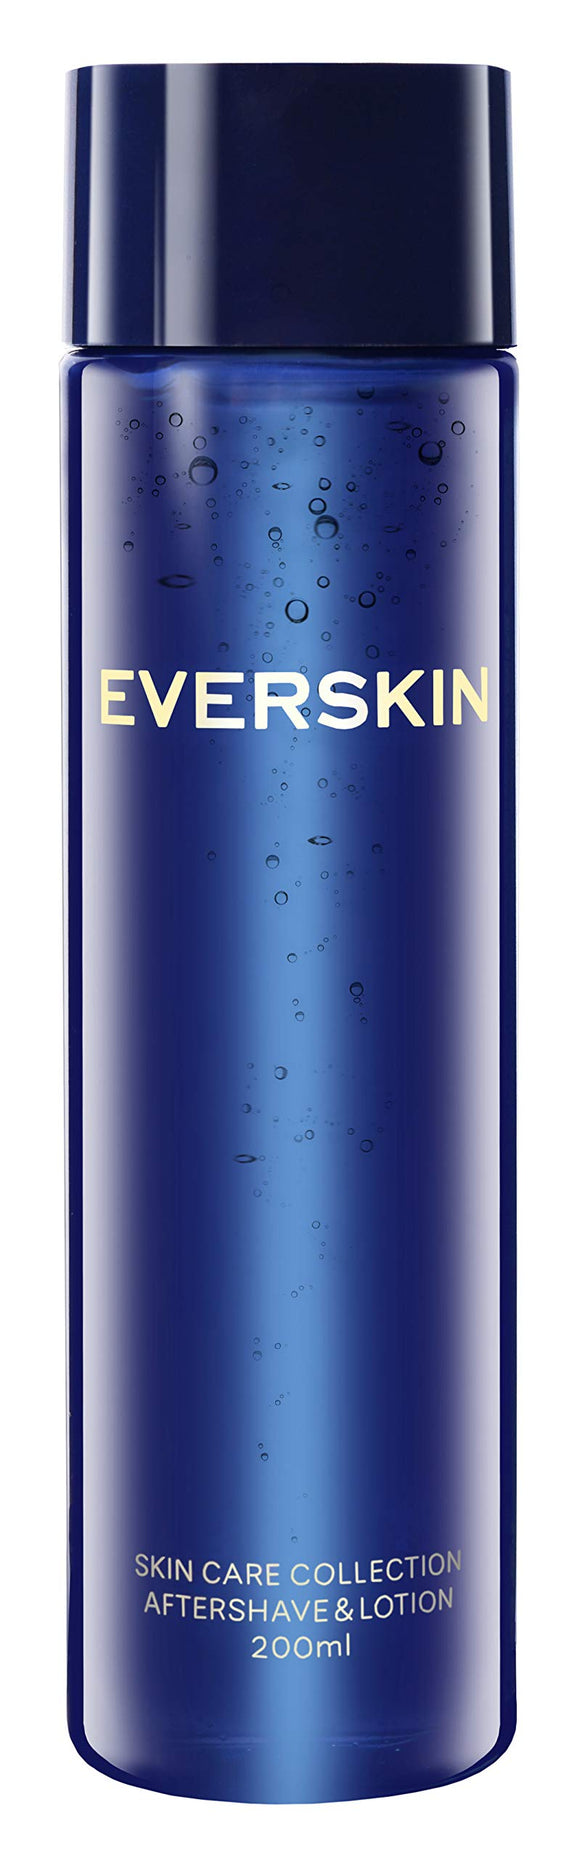 Monde Selection Winner EVERSKIN lotion men's all-in-one aftershave lotion 200ml